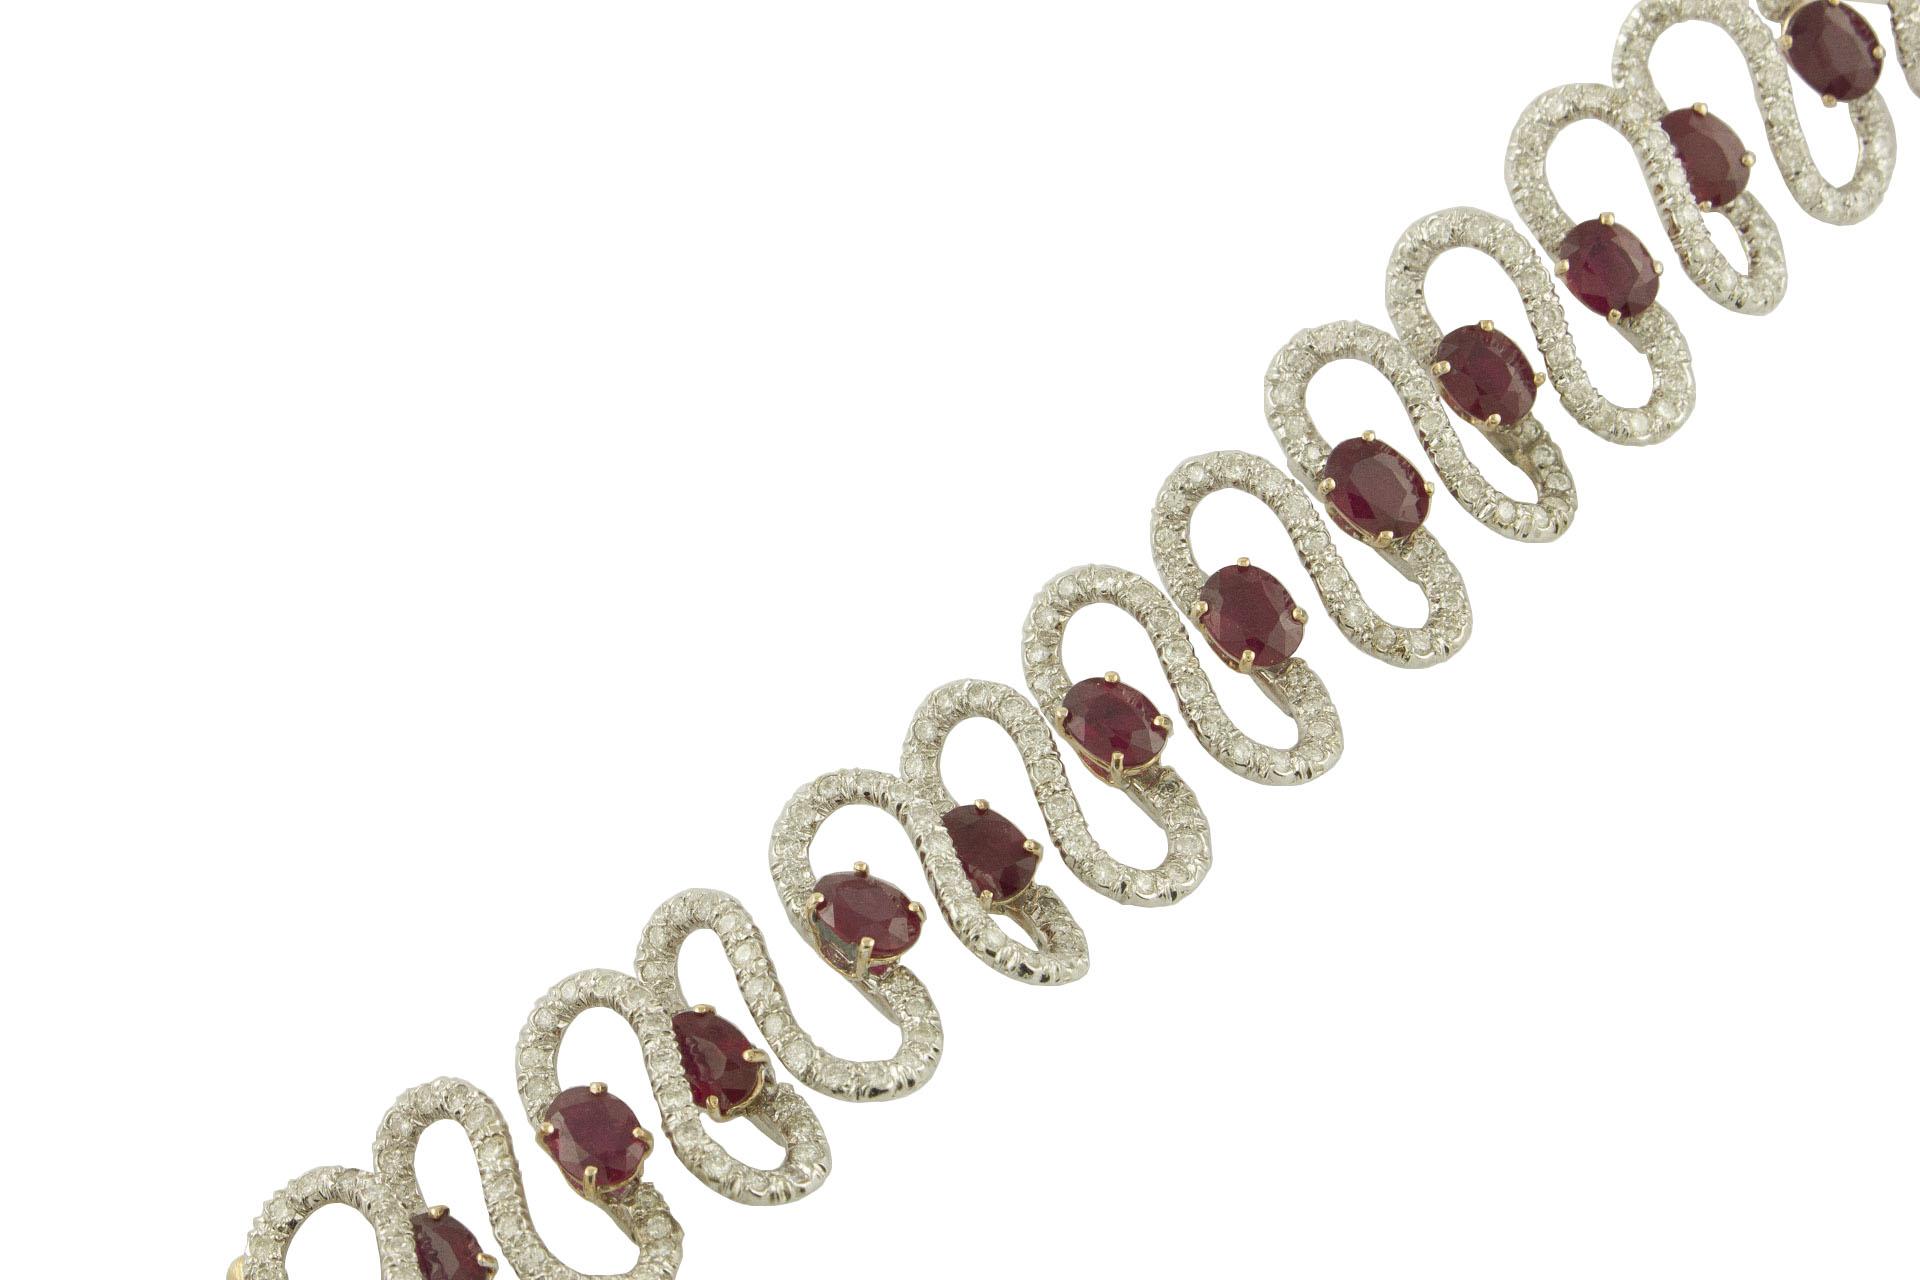 Brilliant Cut Rubies White Diamonds White and Rose Gold Waves Bracelet For Sale